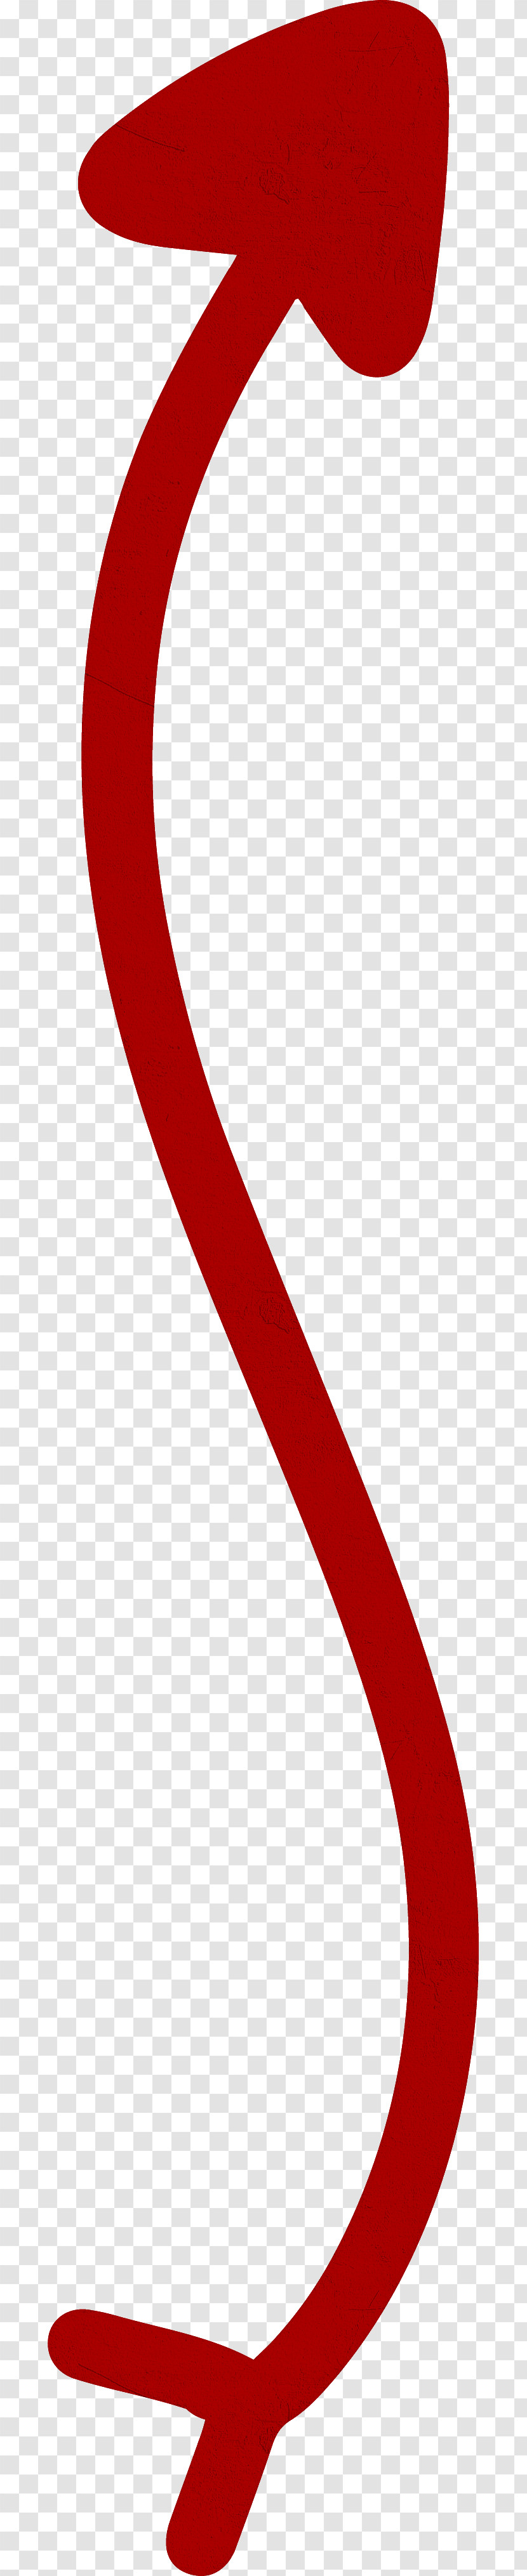 Red Line Material Property Logo Transparent PNG